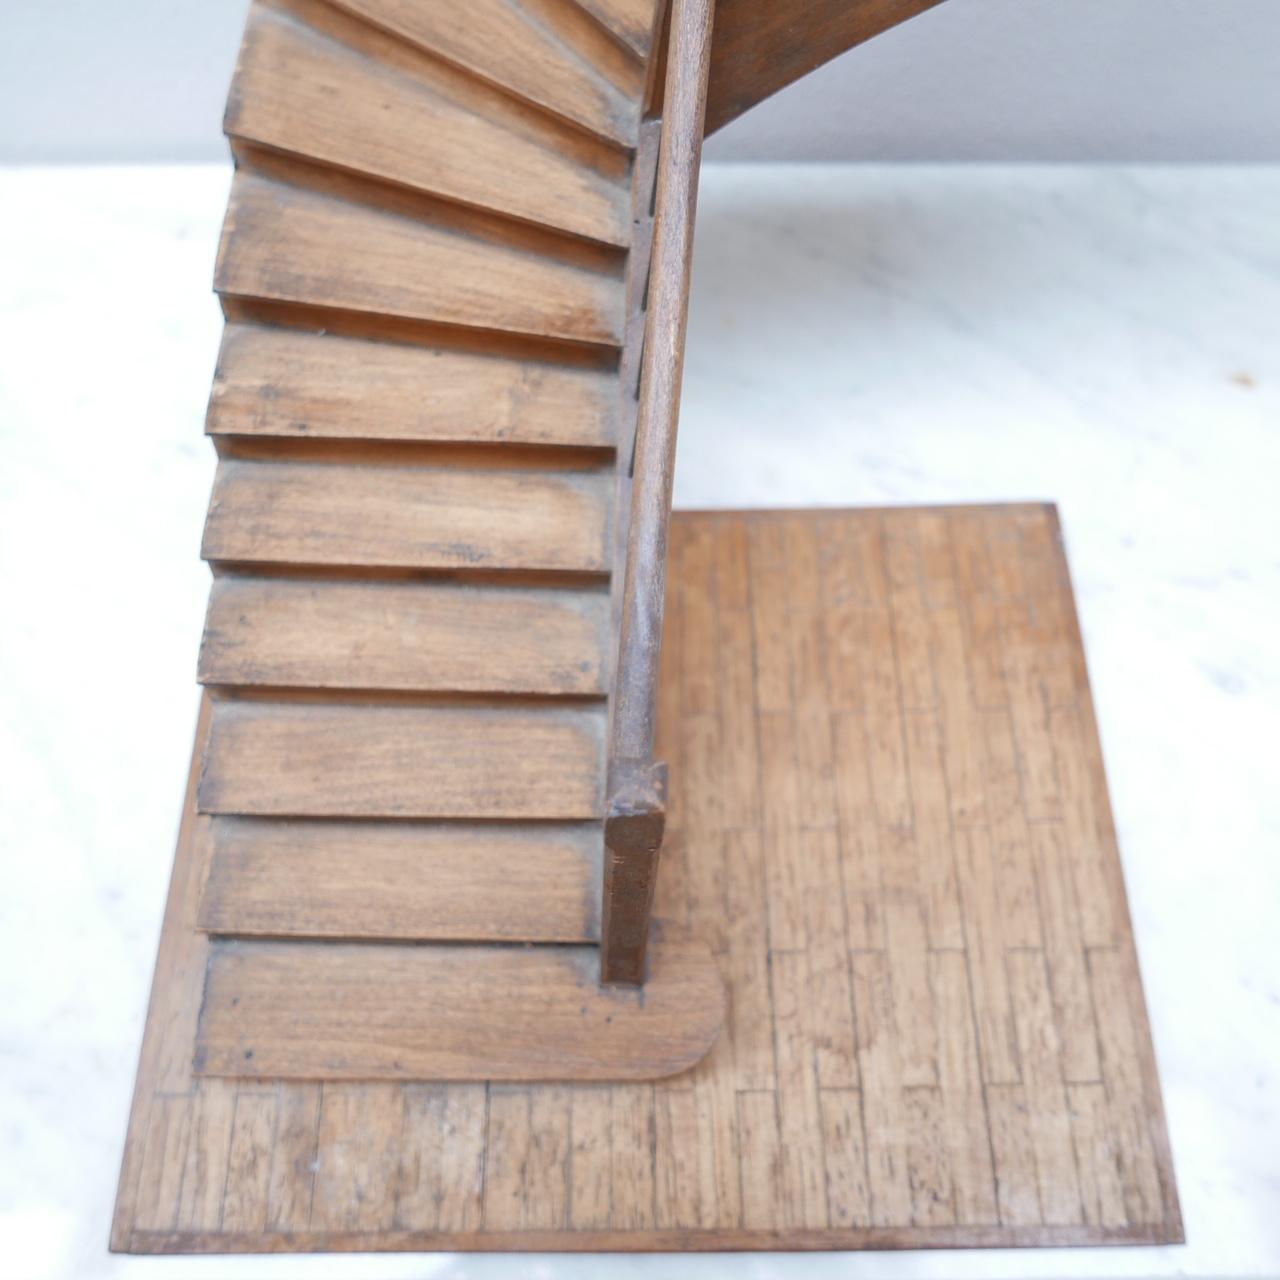 French, likely midcentury apprentice staircase model. 

Sculptural and decorative. 

These were historically used by carpenters apprentices to demonstrate their skills. 

Unsure of which wood was used for construction.
  